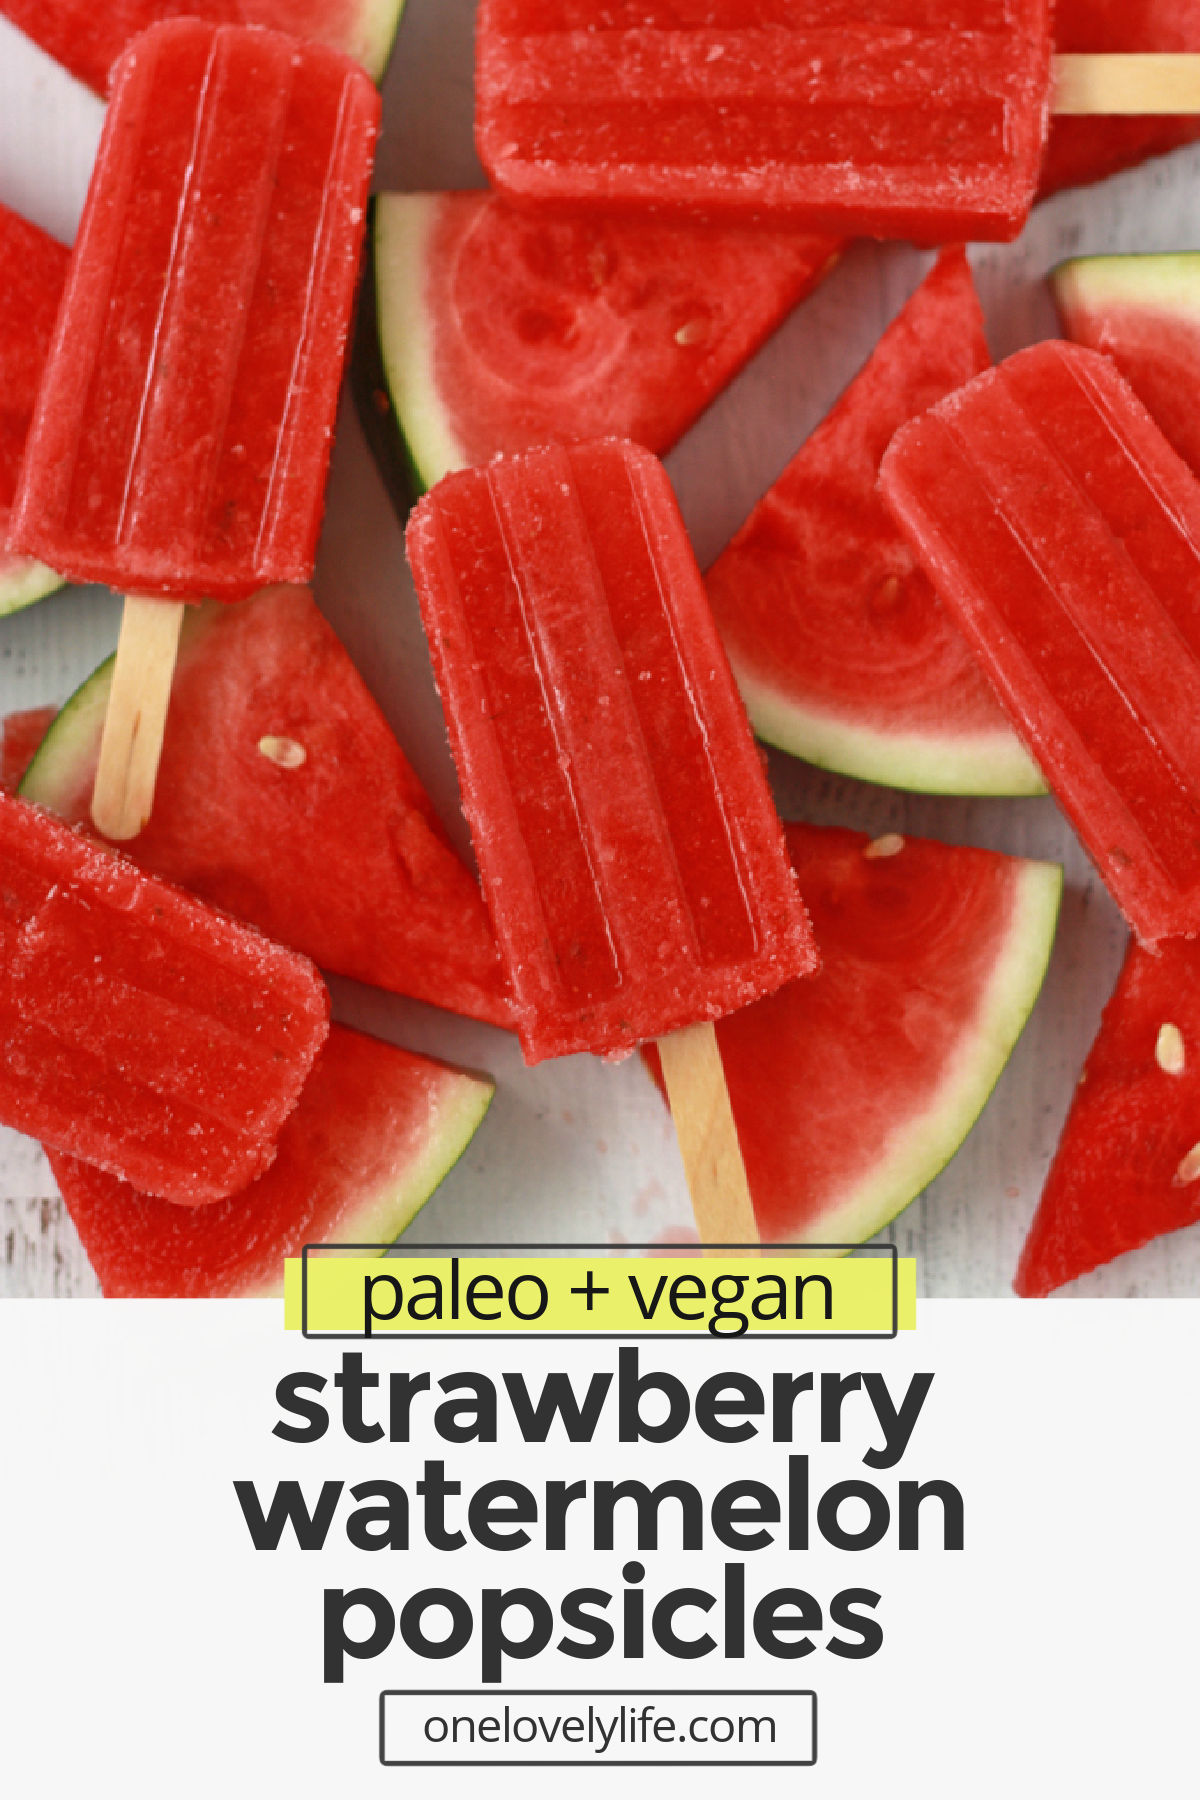 Strawberry Watermelon Popsicles are a fresh, bright, healthy warm weather treat! They're 100% fruit and naturally help balance your electrolytes. (Vegan & paleo) // healthy popsicles // strawberry popsicles // watermelon popsicles // paleo popsicles // vegan popsicles // naturally sweetened // healthy snack //